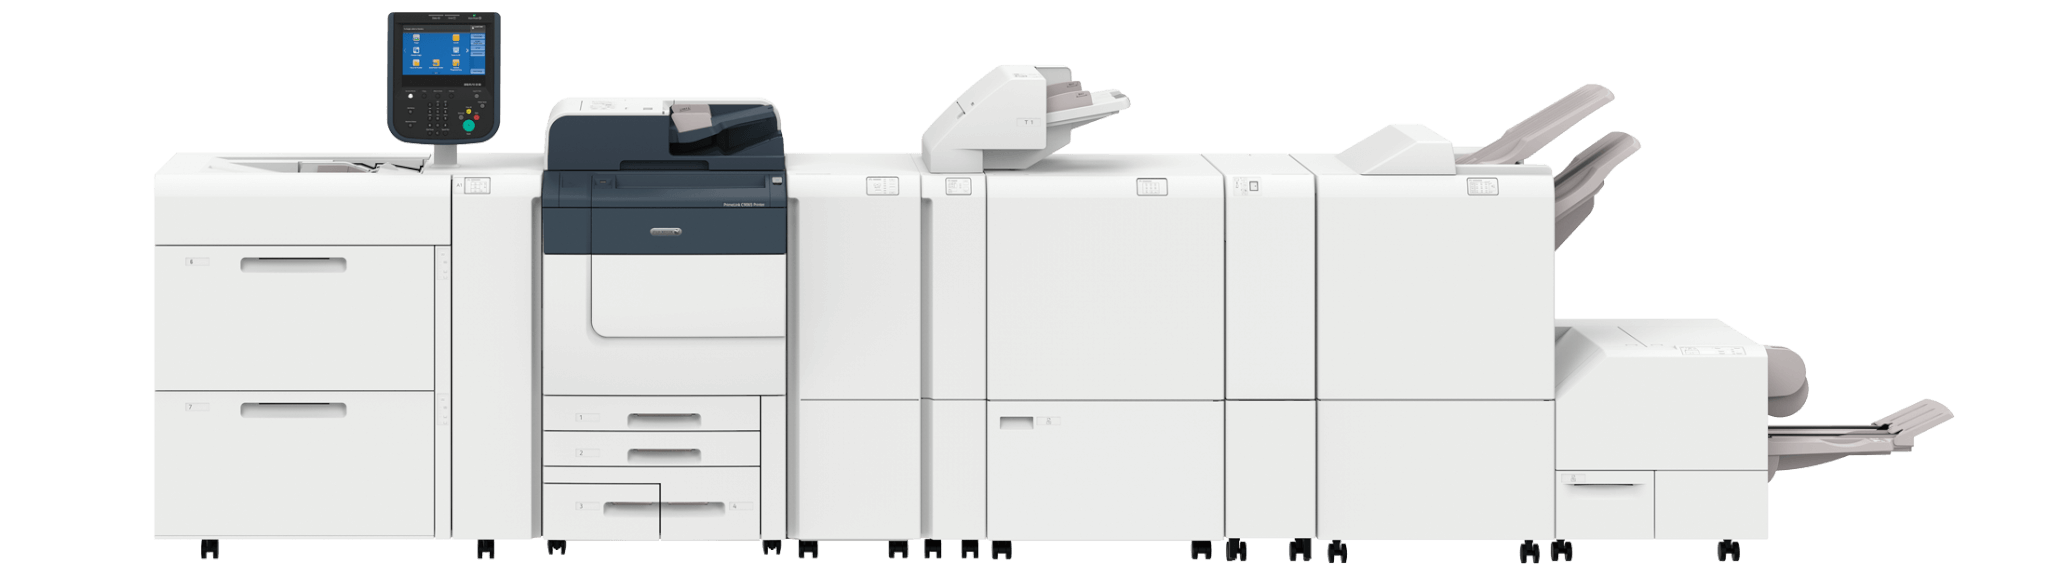 Series of printers and copiers